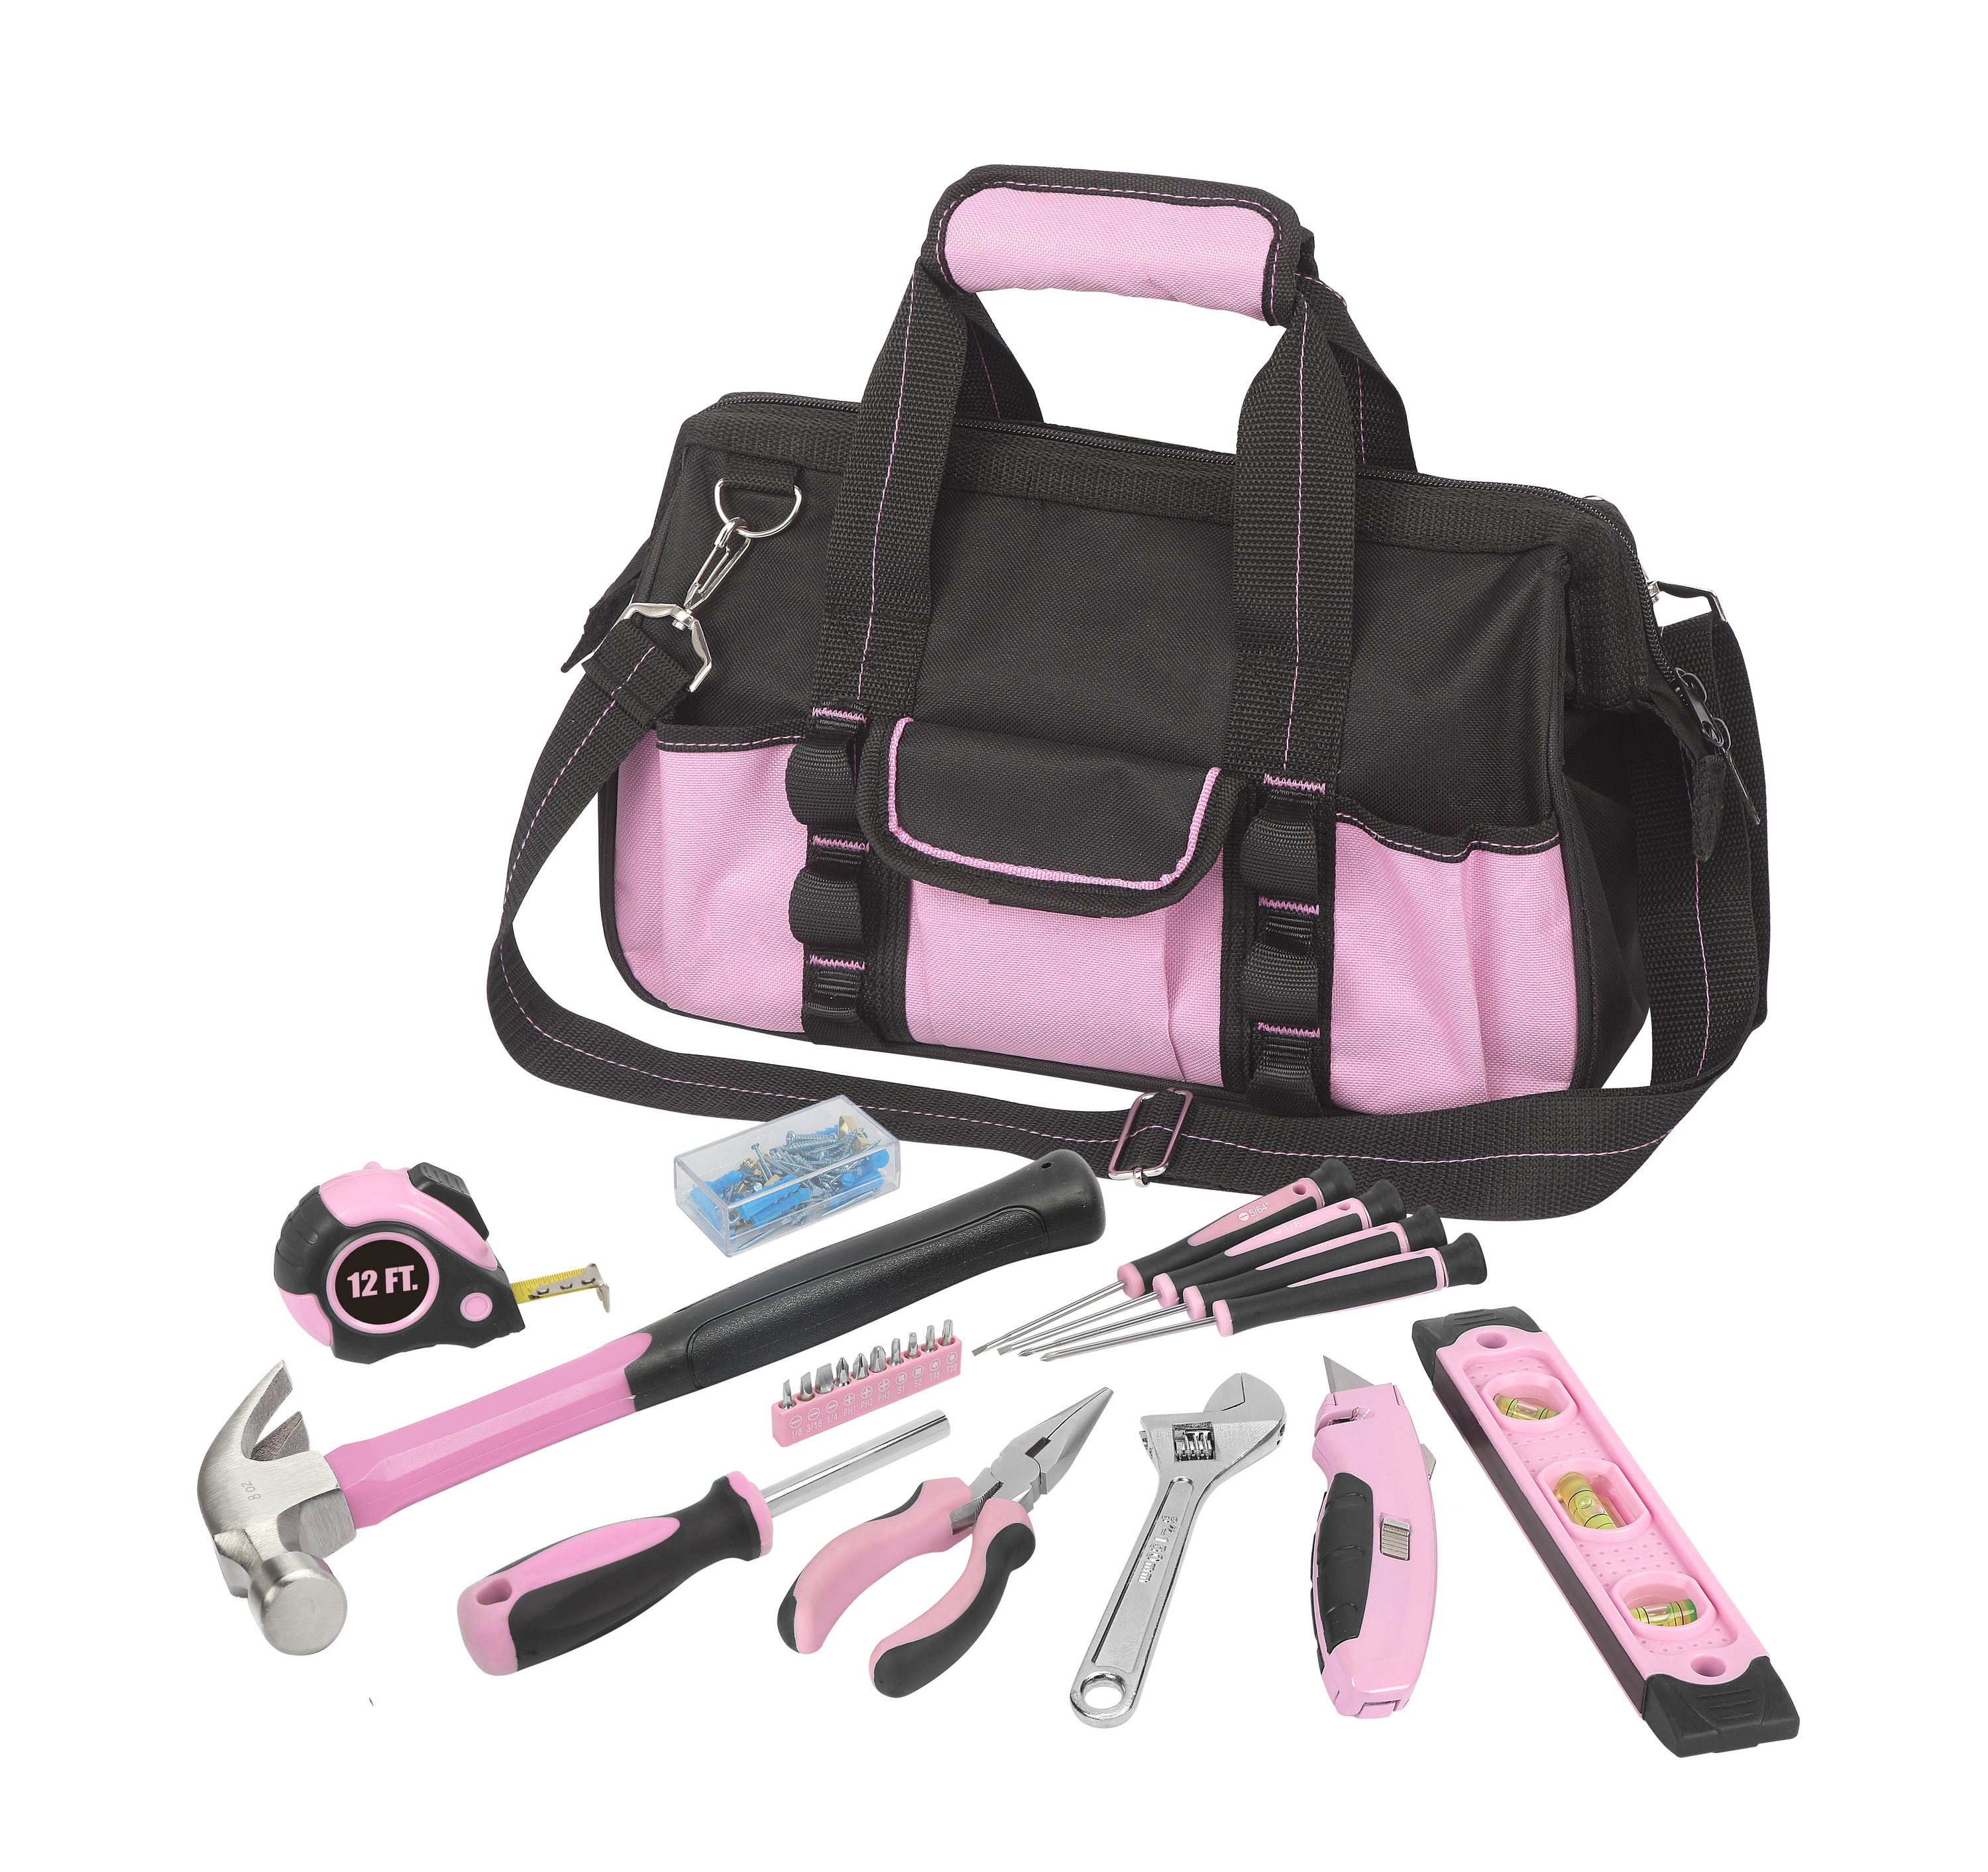 SHALL 26-Piece Kids Size Tool Set, Pink Real Tools for Kids with 12 Tool  Bag, Safety Certified Children Learning Tool Kit with Hand Tools for Boys 